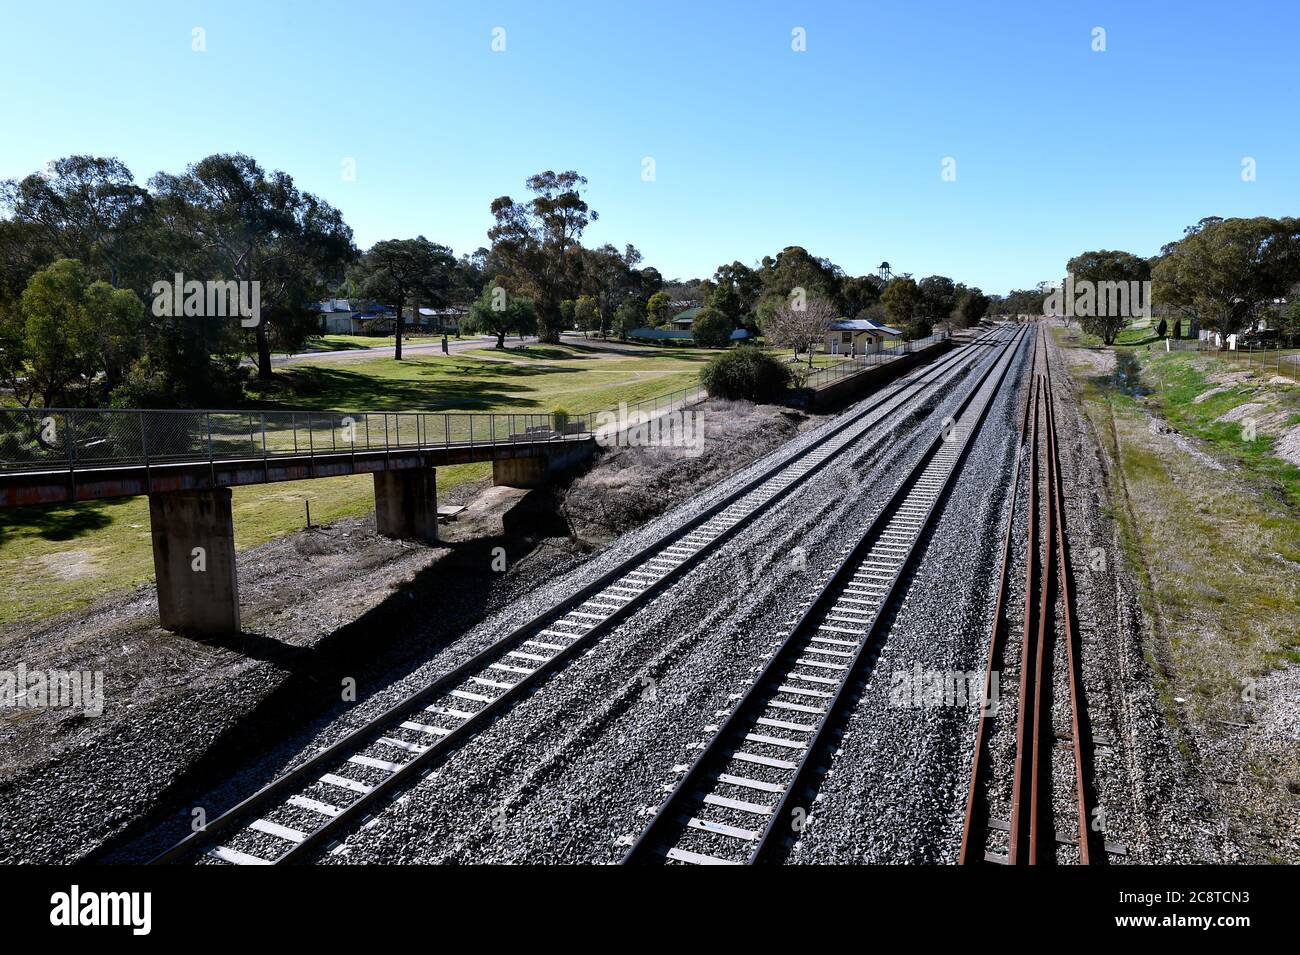 Glenrowan, Victoria. The Glenrowan Station where Ned Kelly, wounded by gunshots, was sent by train to Benalla and then Melbourne Gaol. Stock Photo